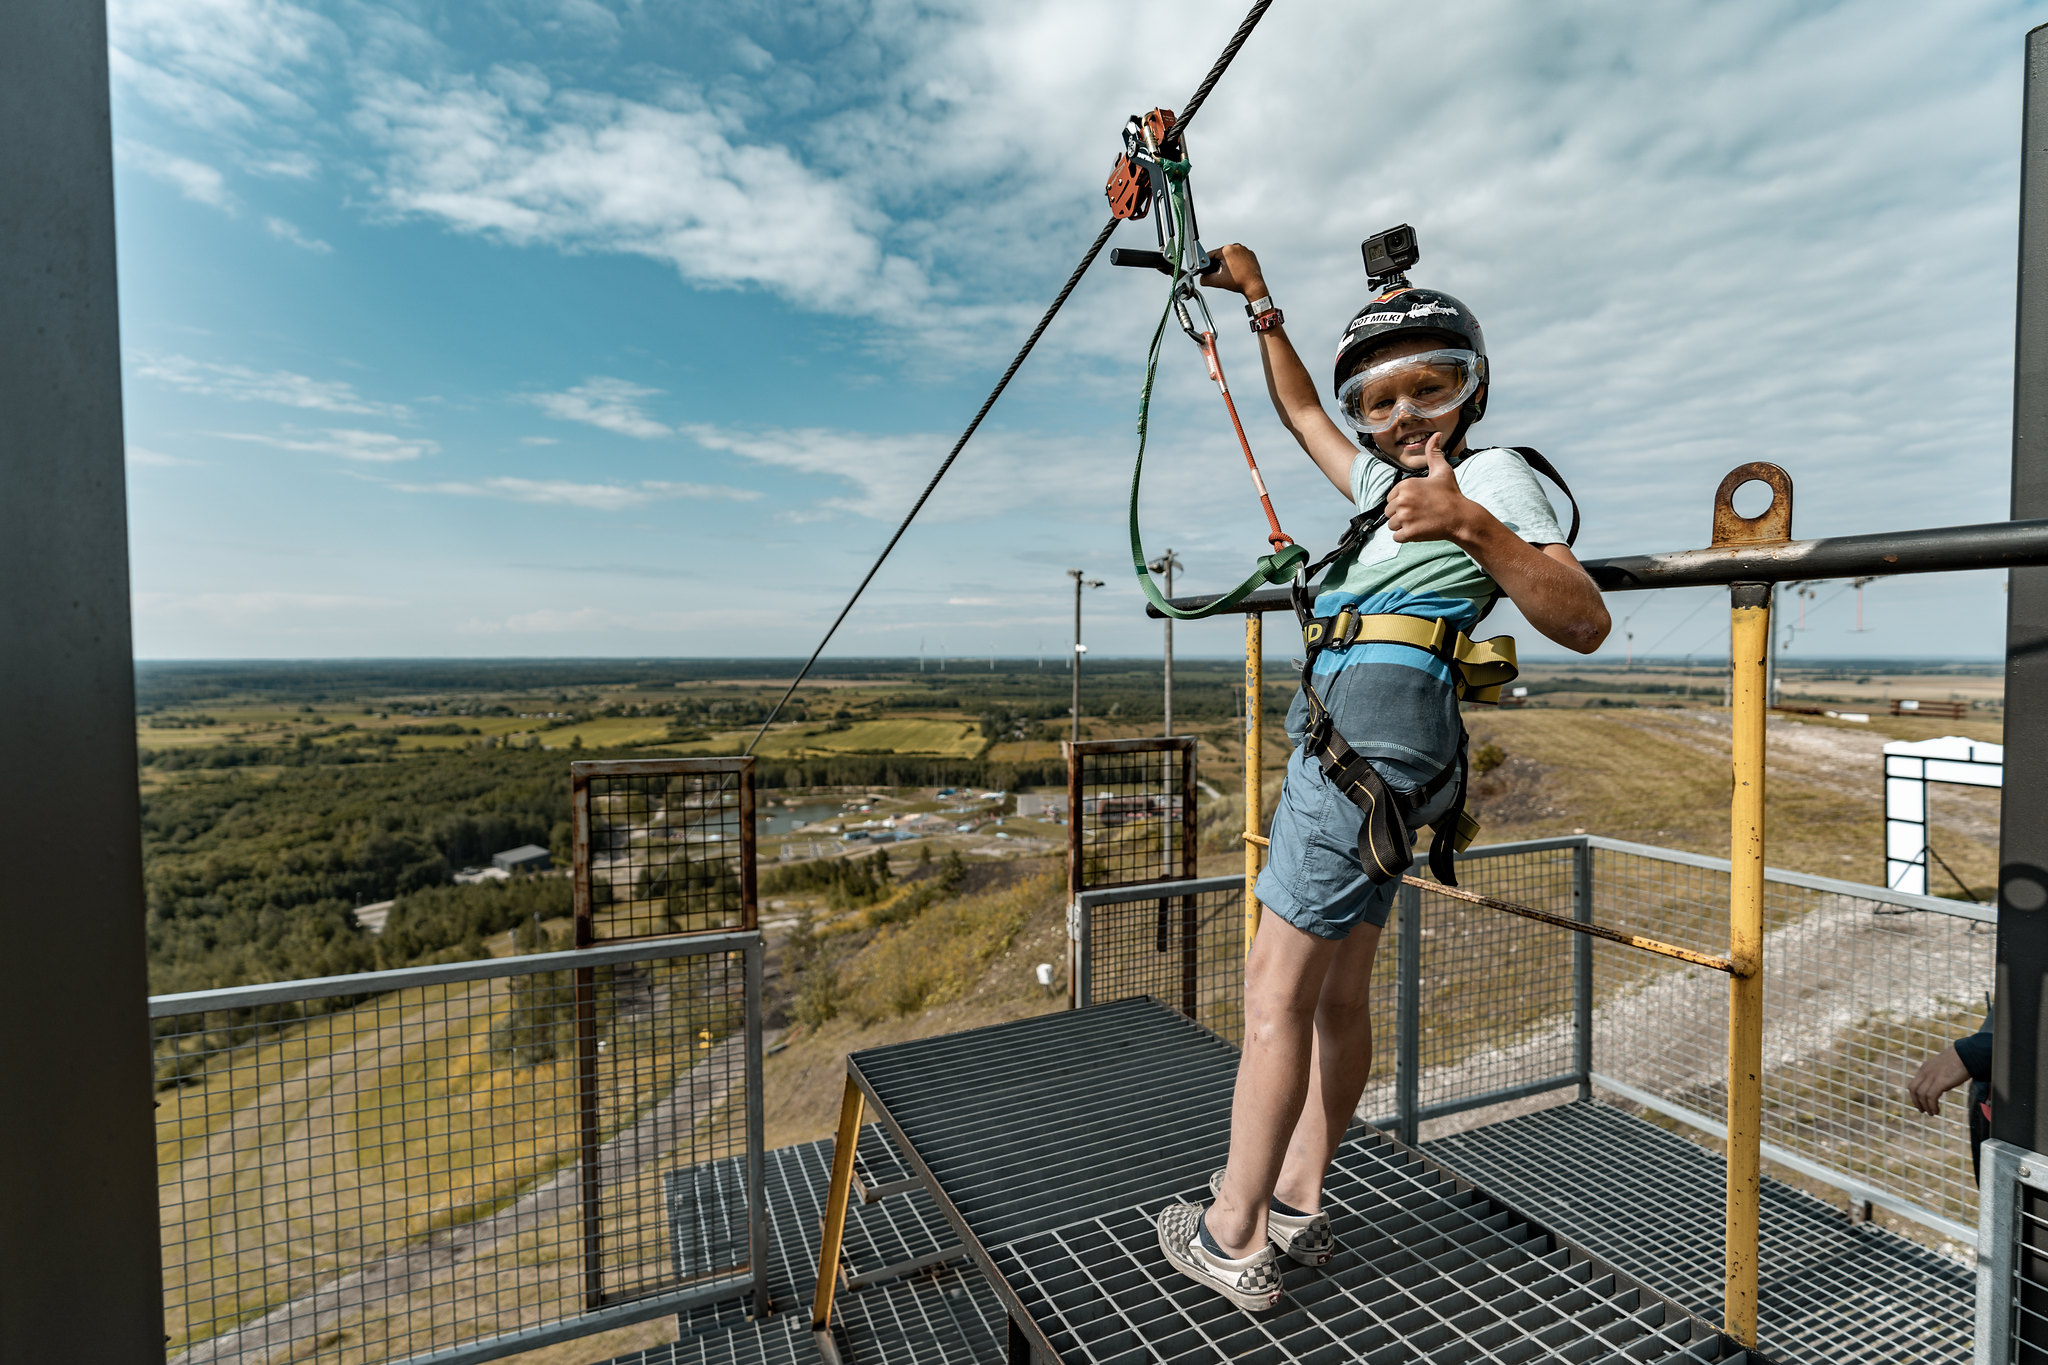 Child gives thumbs up before going on zipline